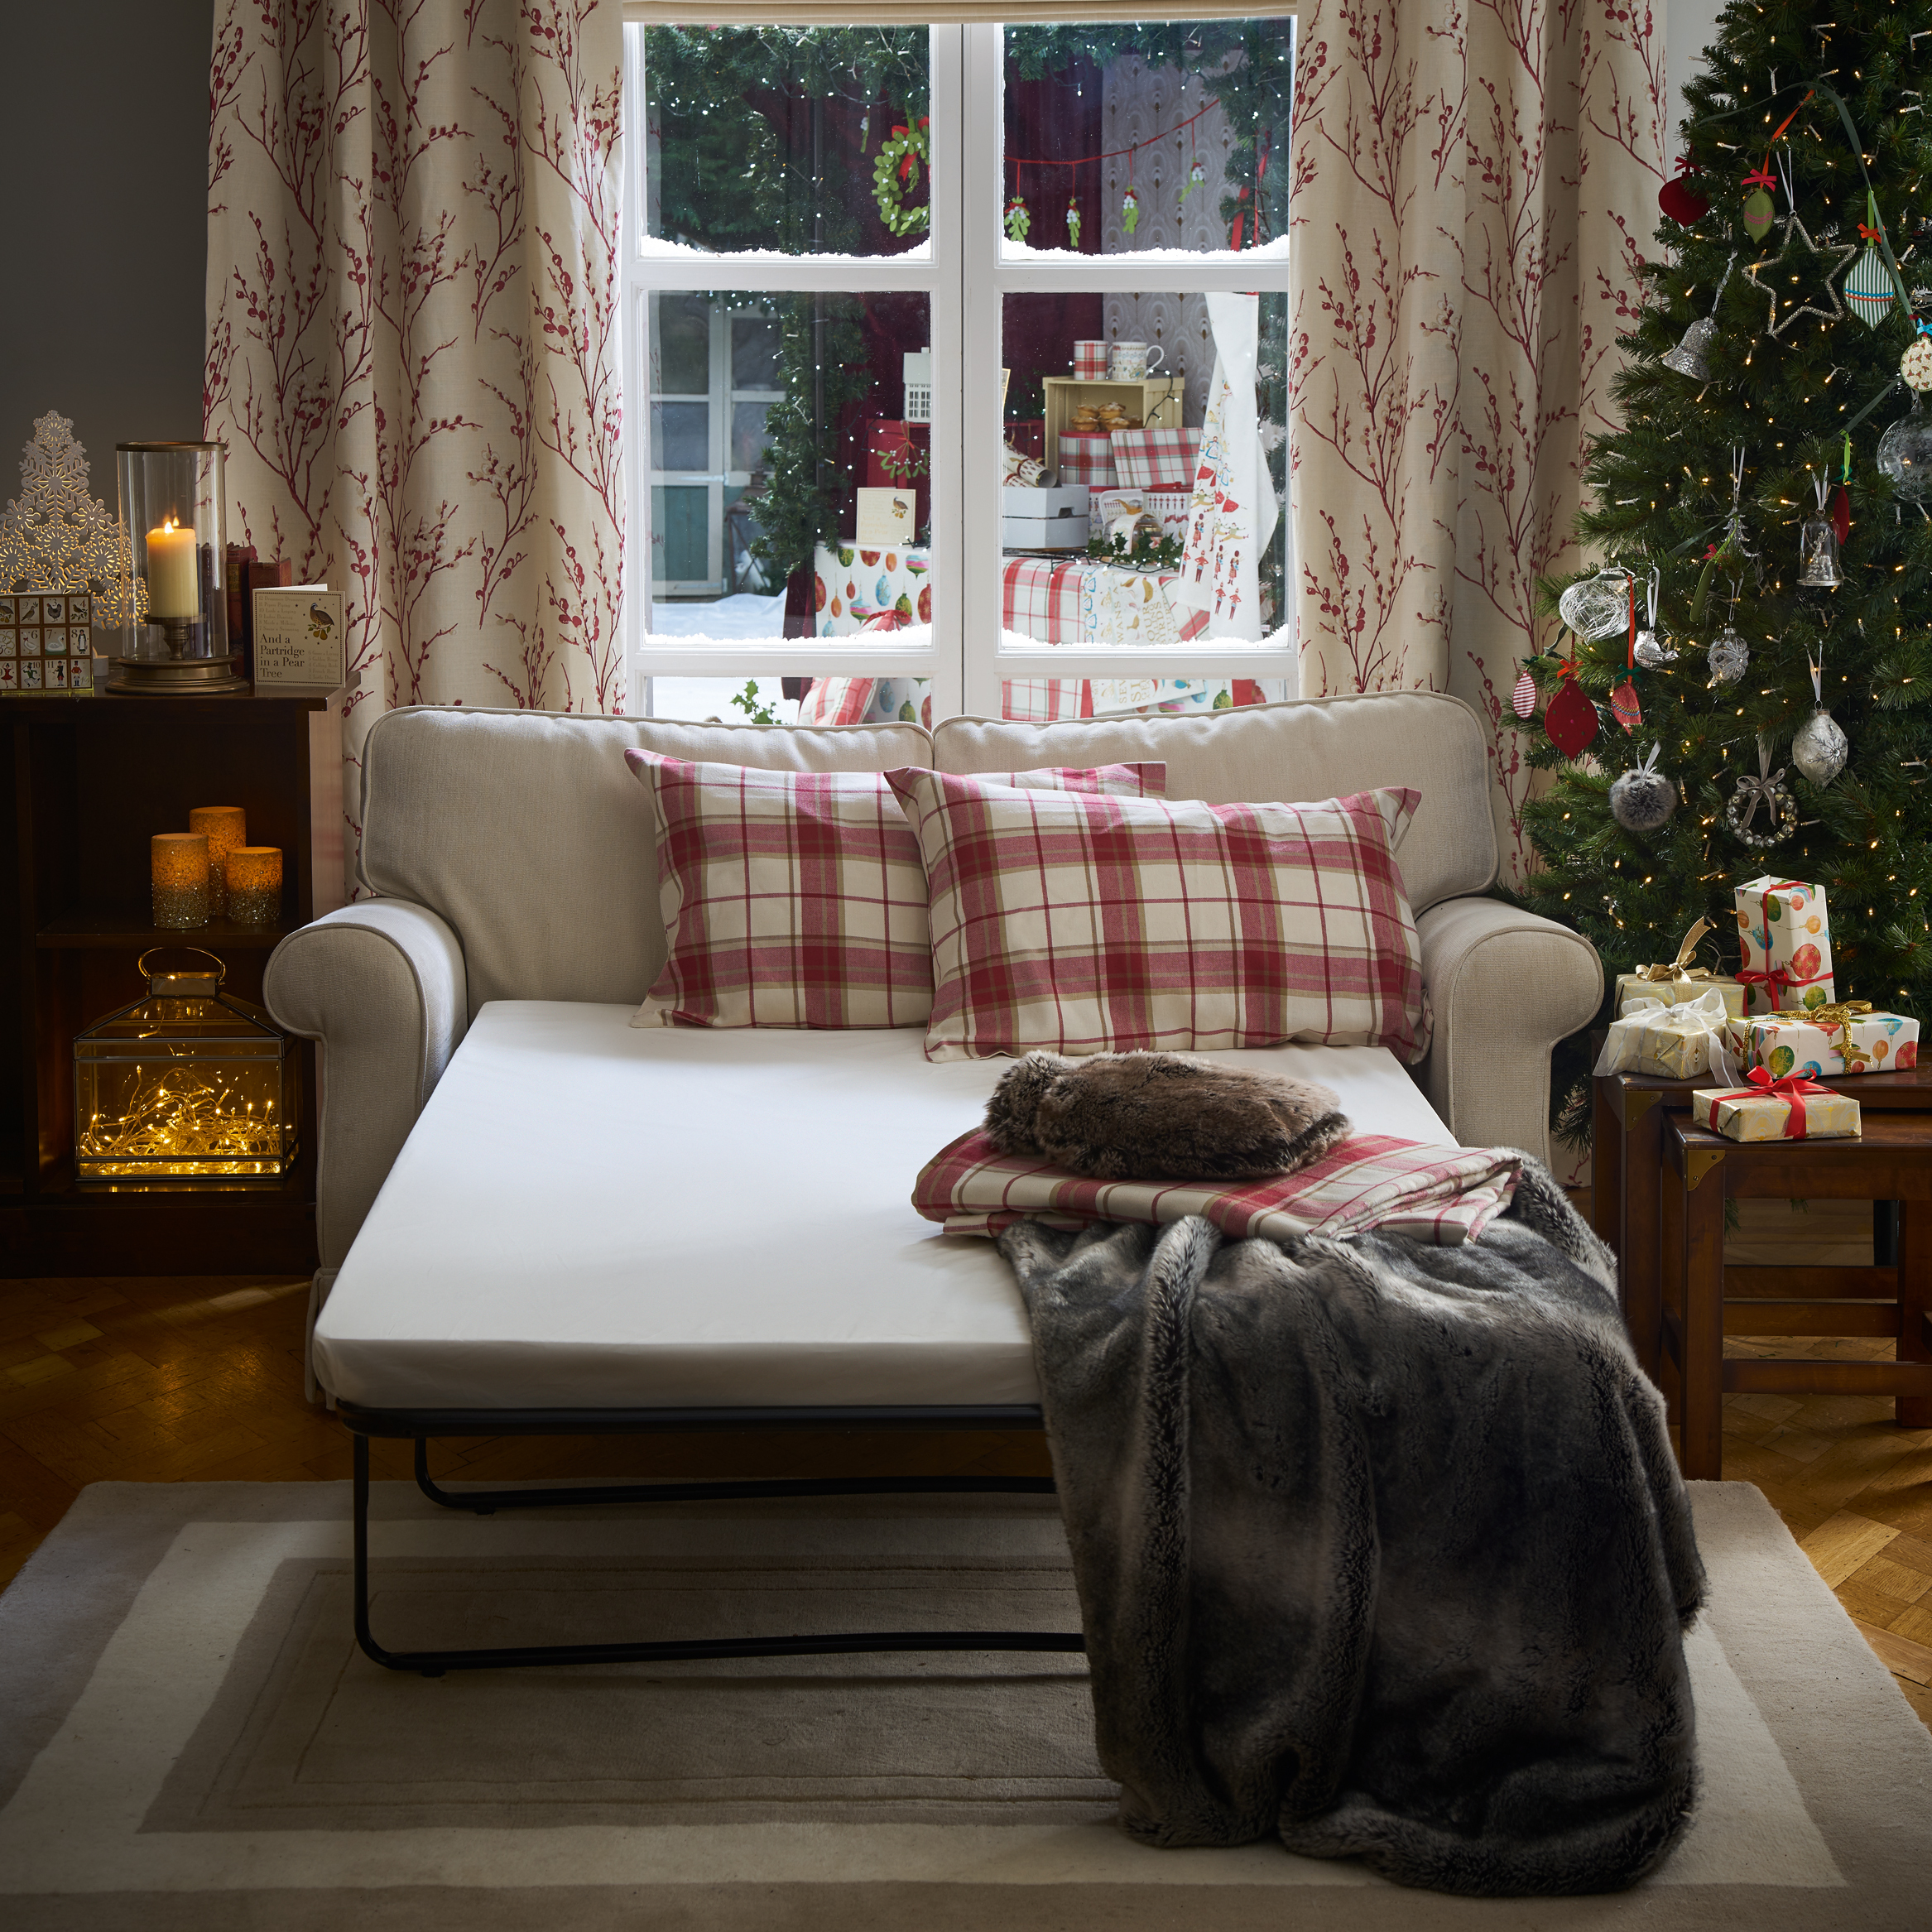 How to Prepare your Home for Overnight Guests this Christmas